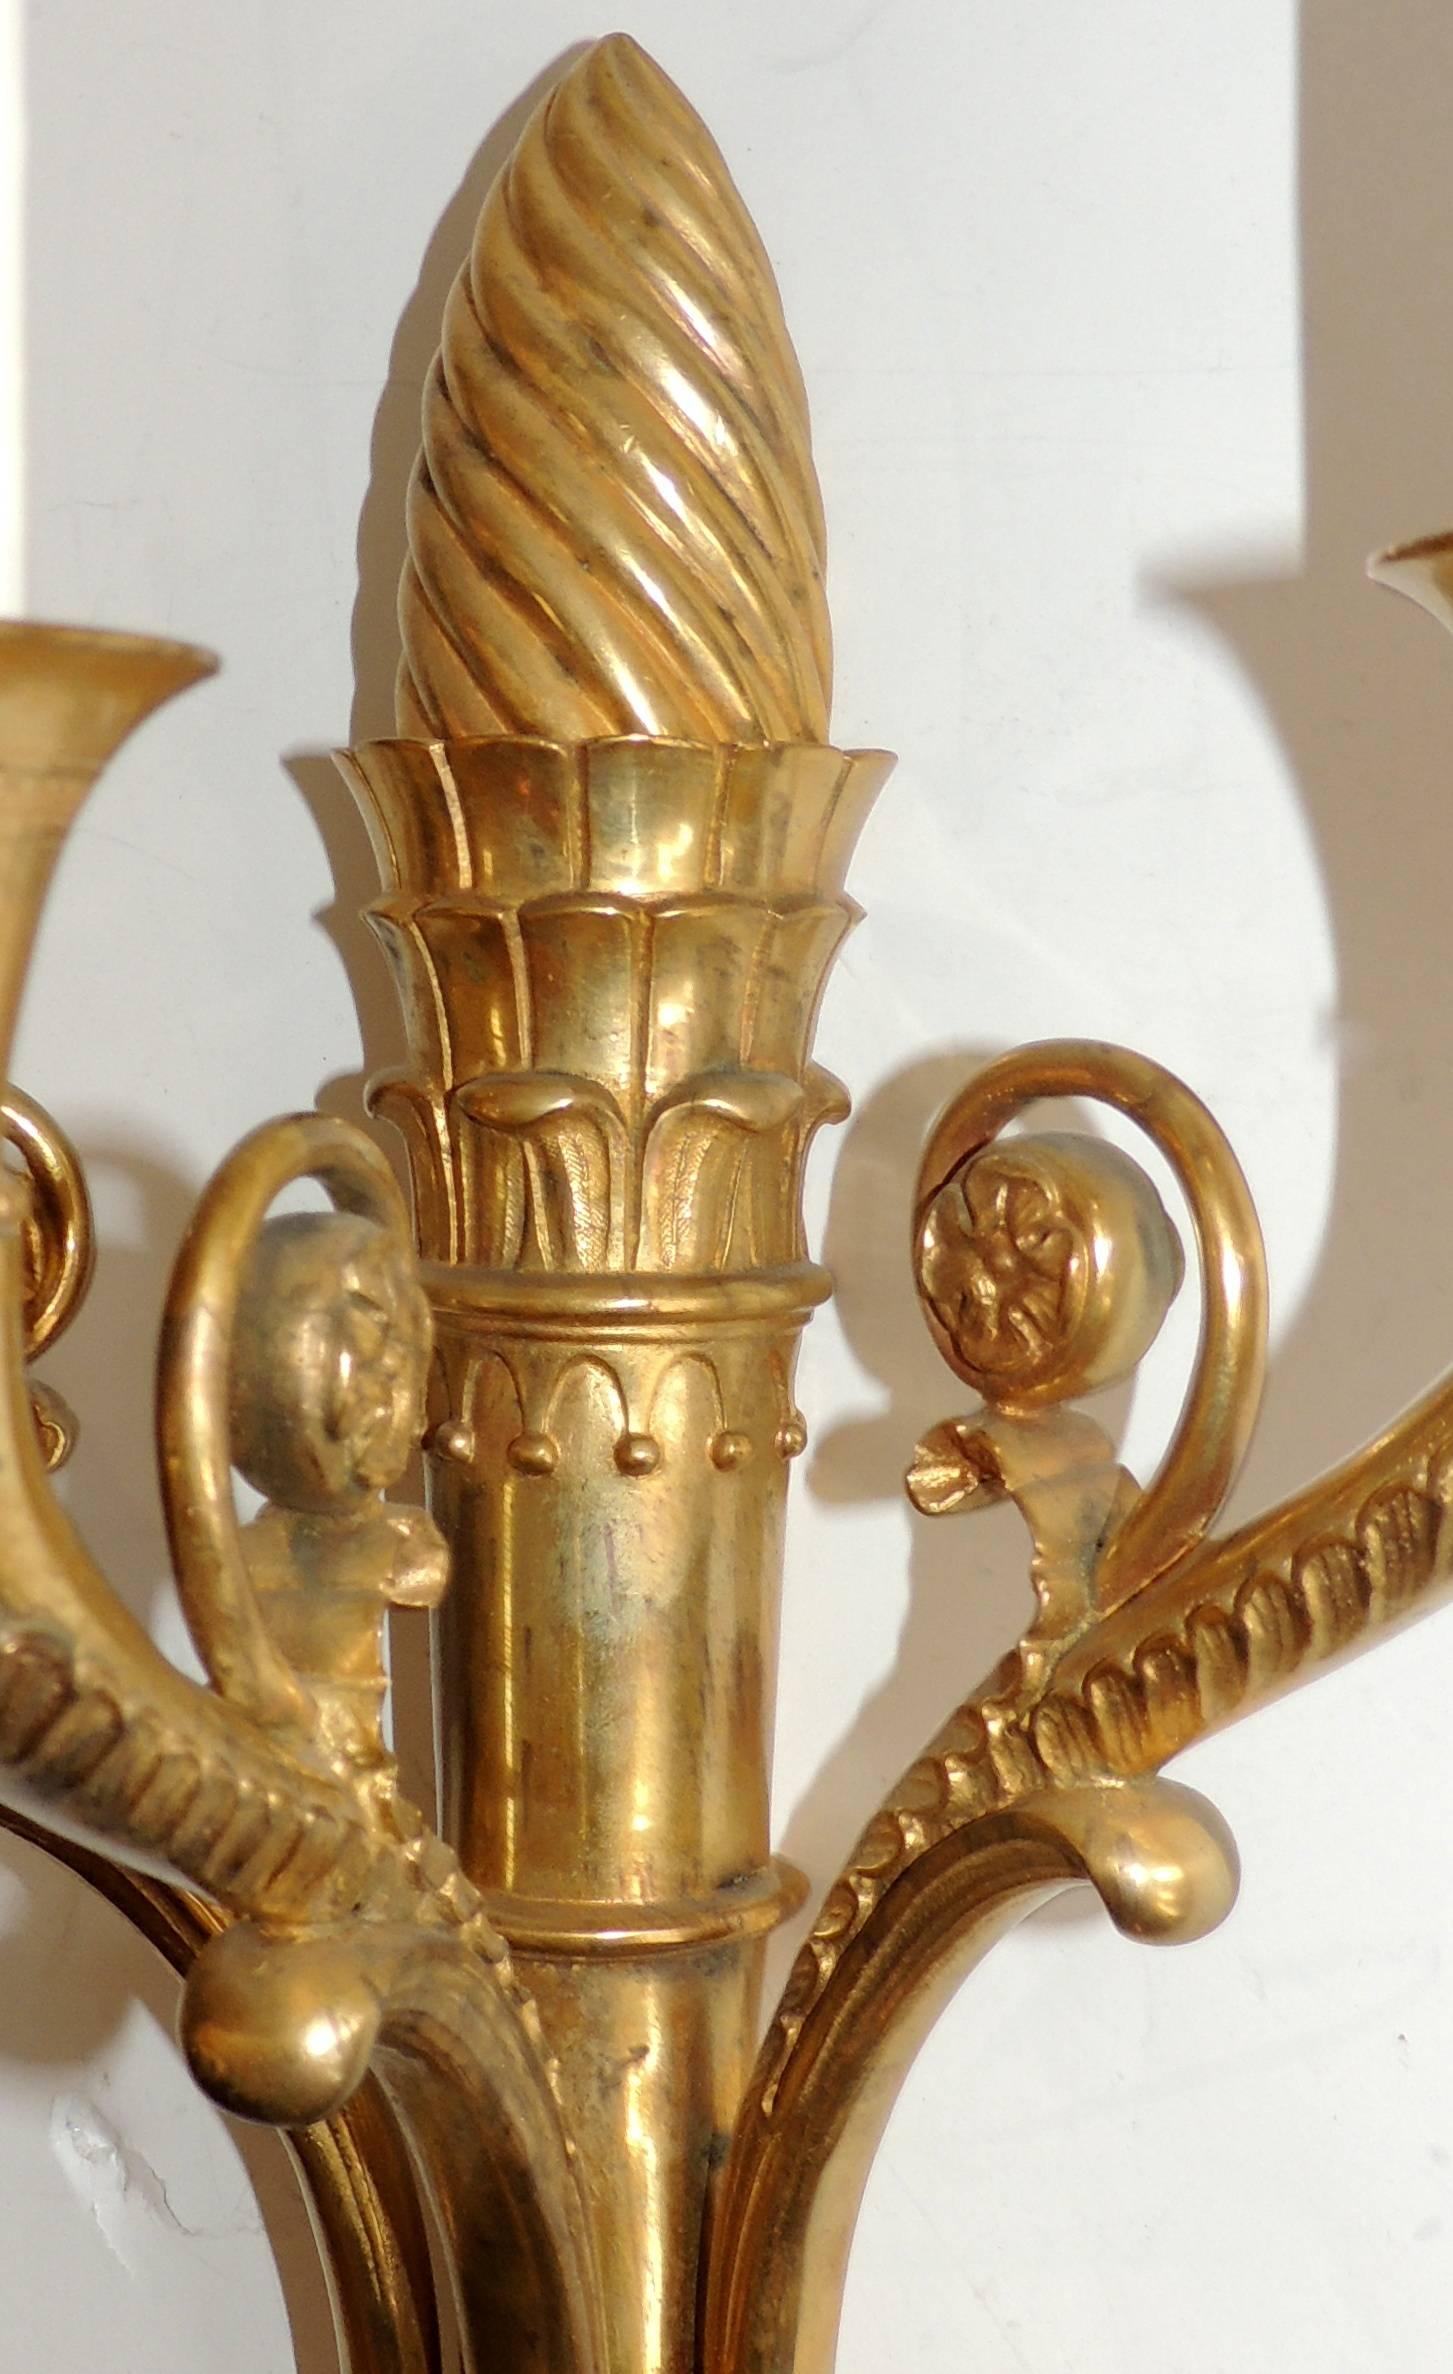 An elegant pair of Regency / neoclassical French Empire, gilt doré bronze sconces with lion heads and topped off with a twisted crown finial.

Measure: 18.5 H x 10